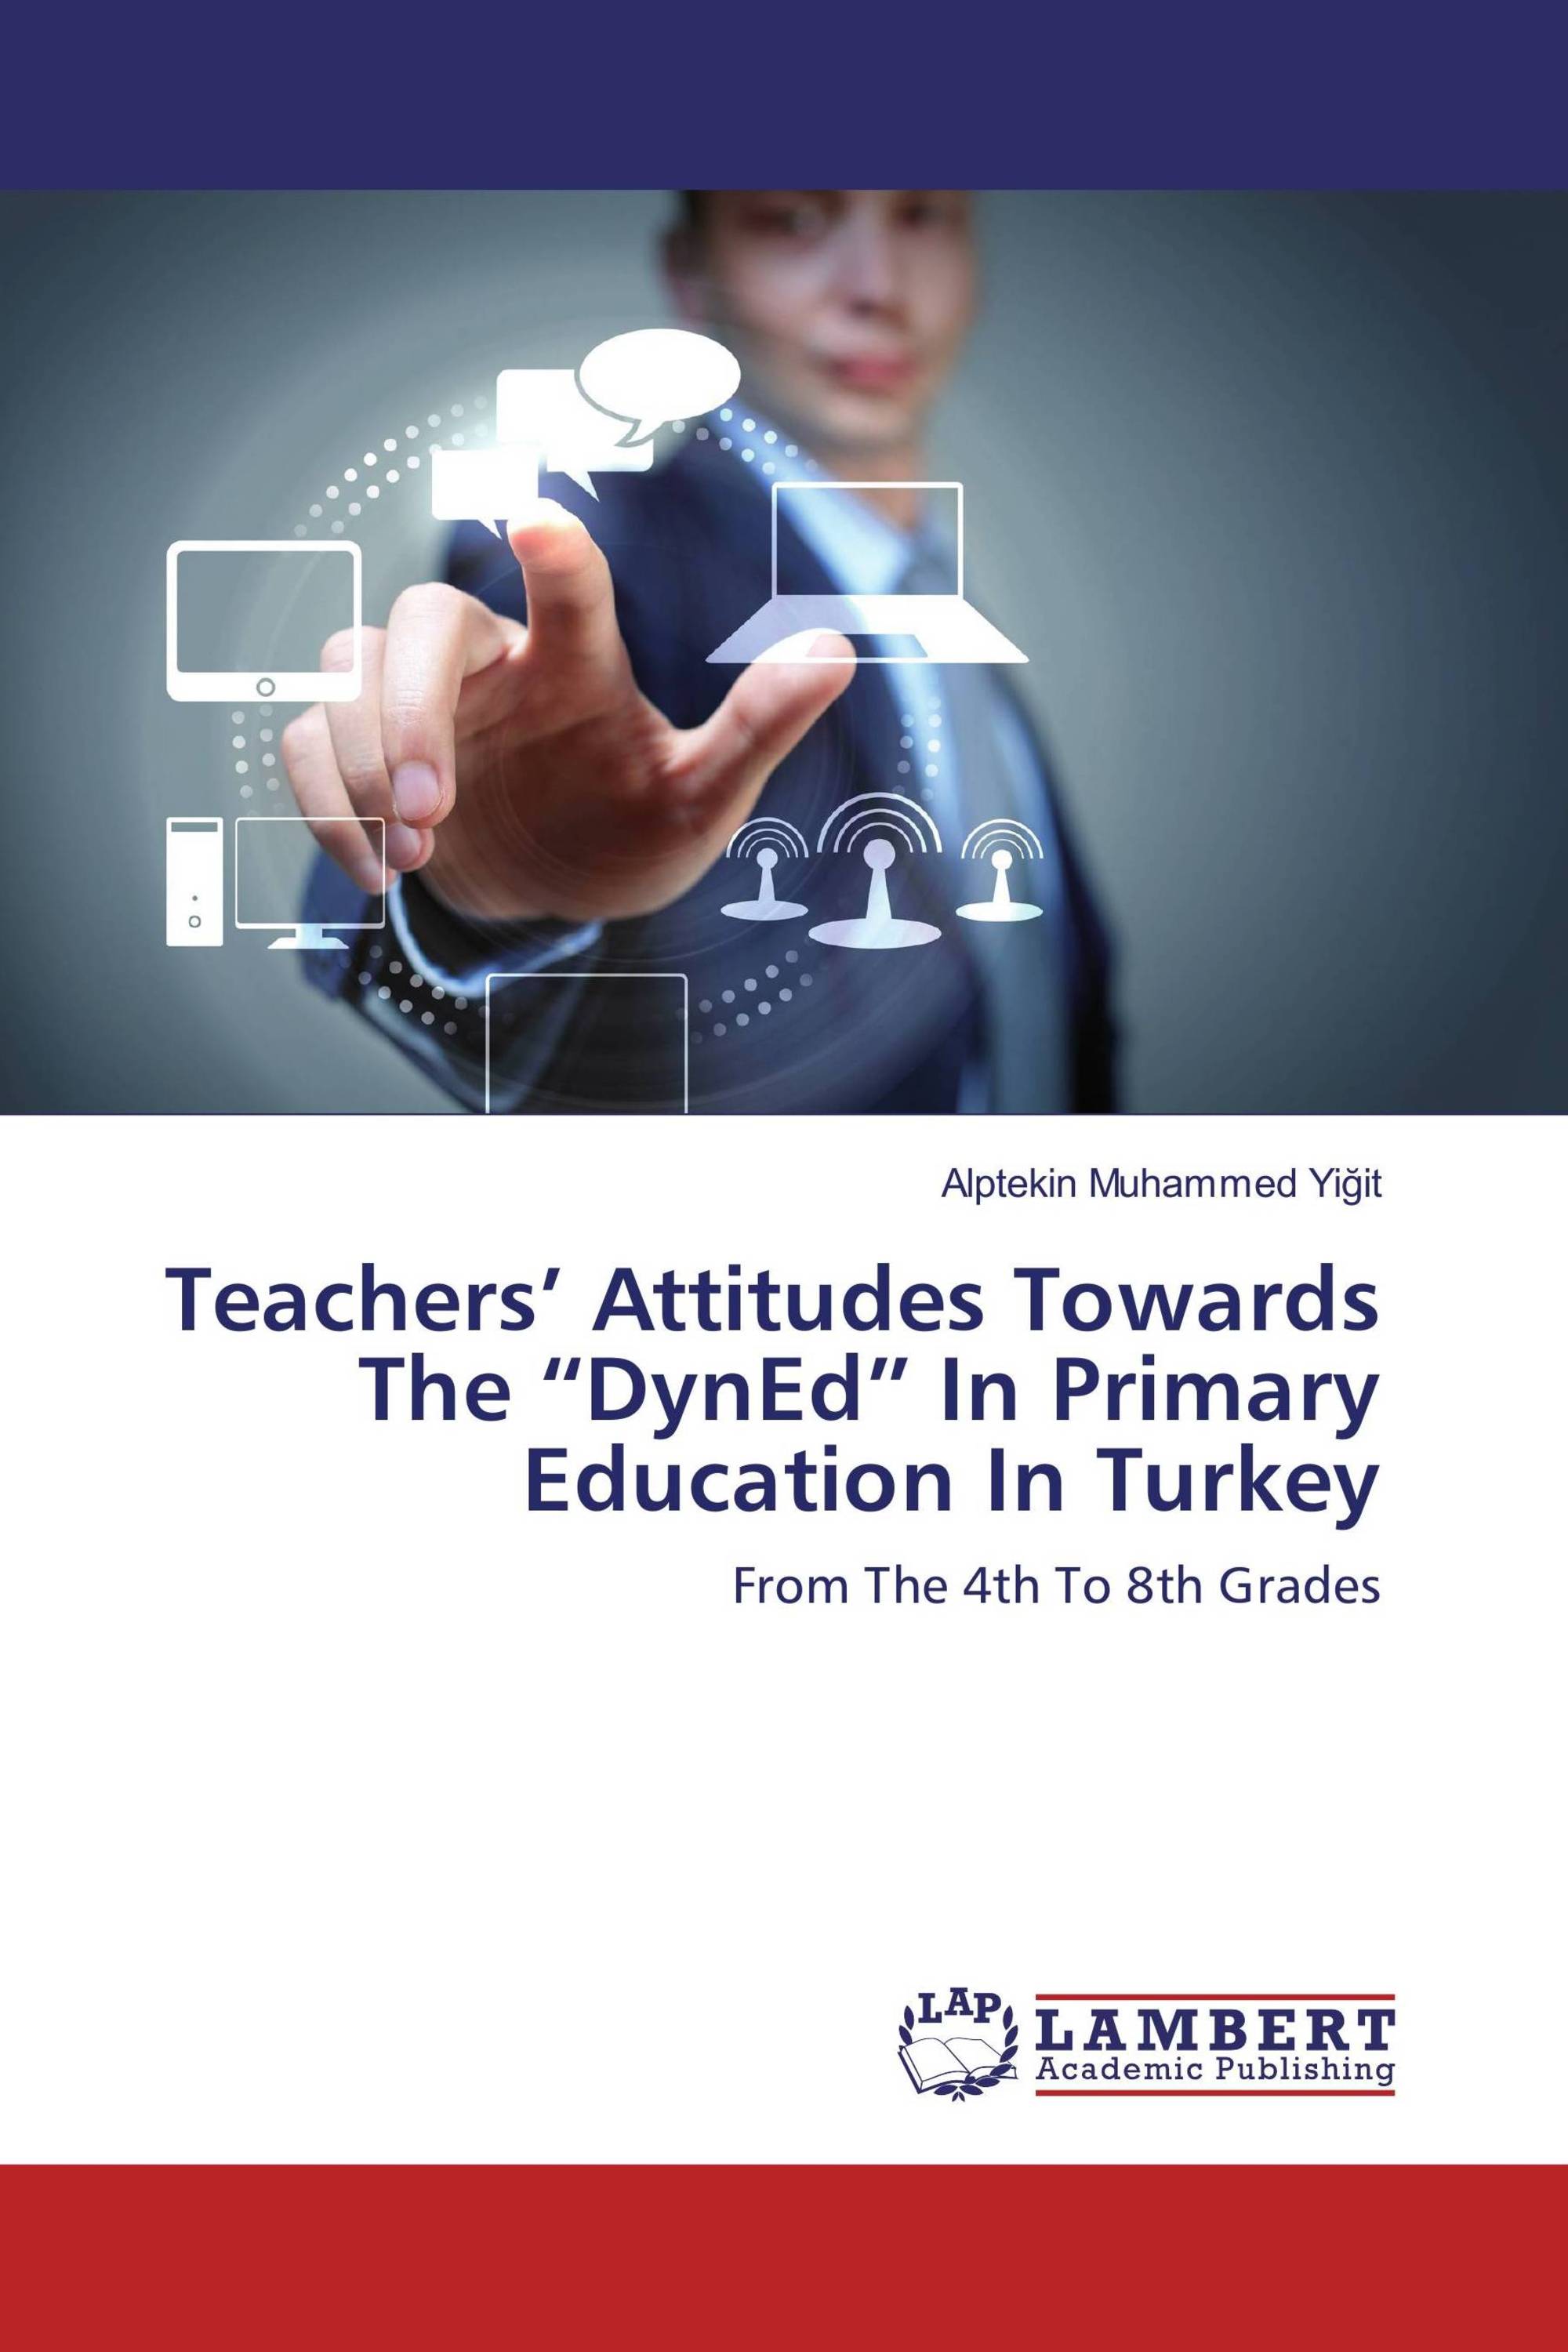 Teachers’ Attitudes Towards The “DynEd” In Primary Education In Turkey